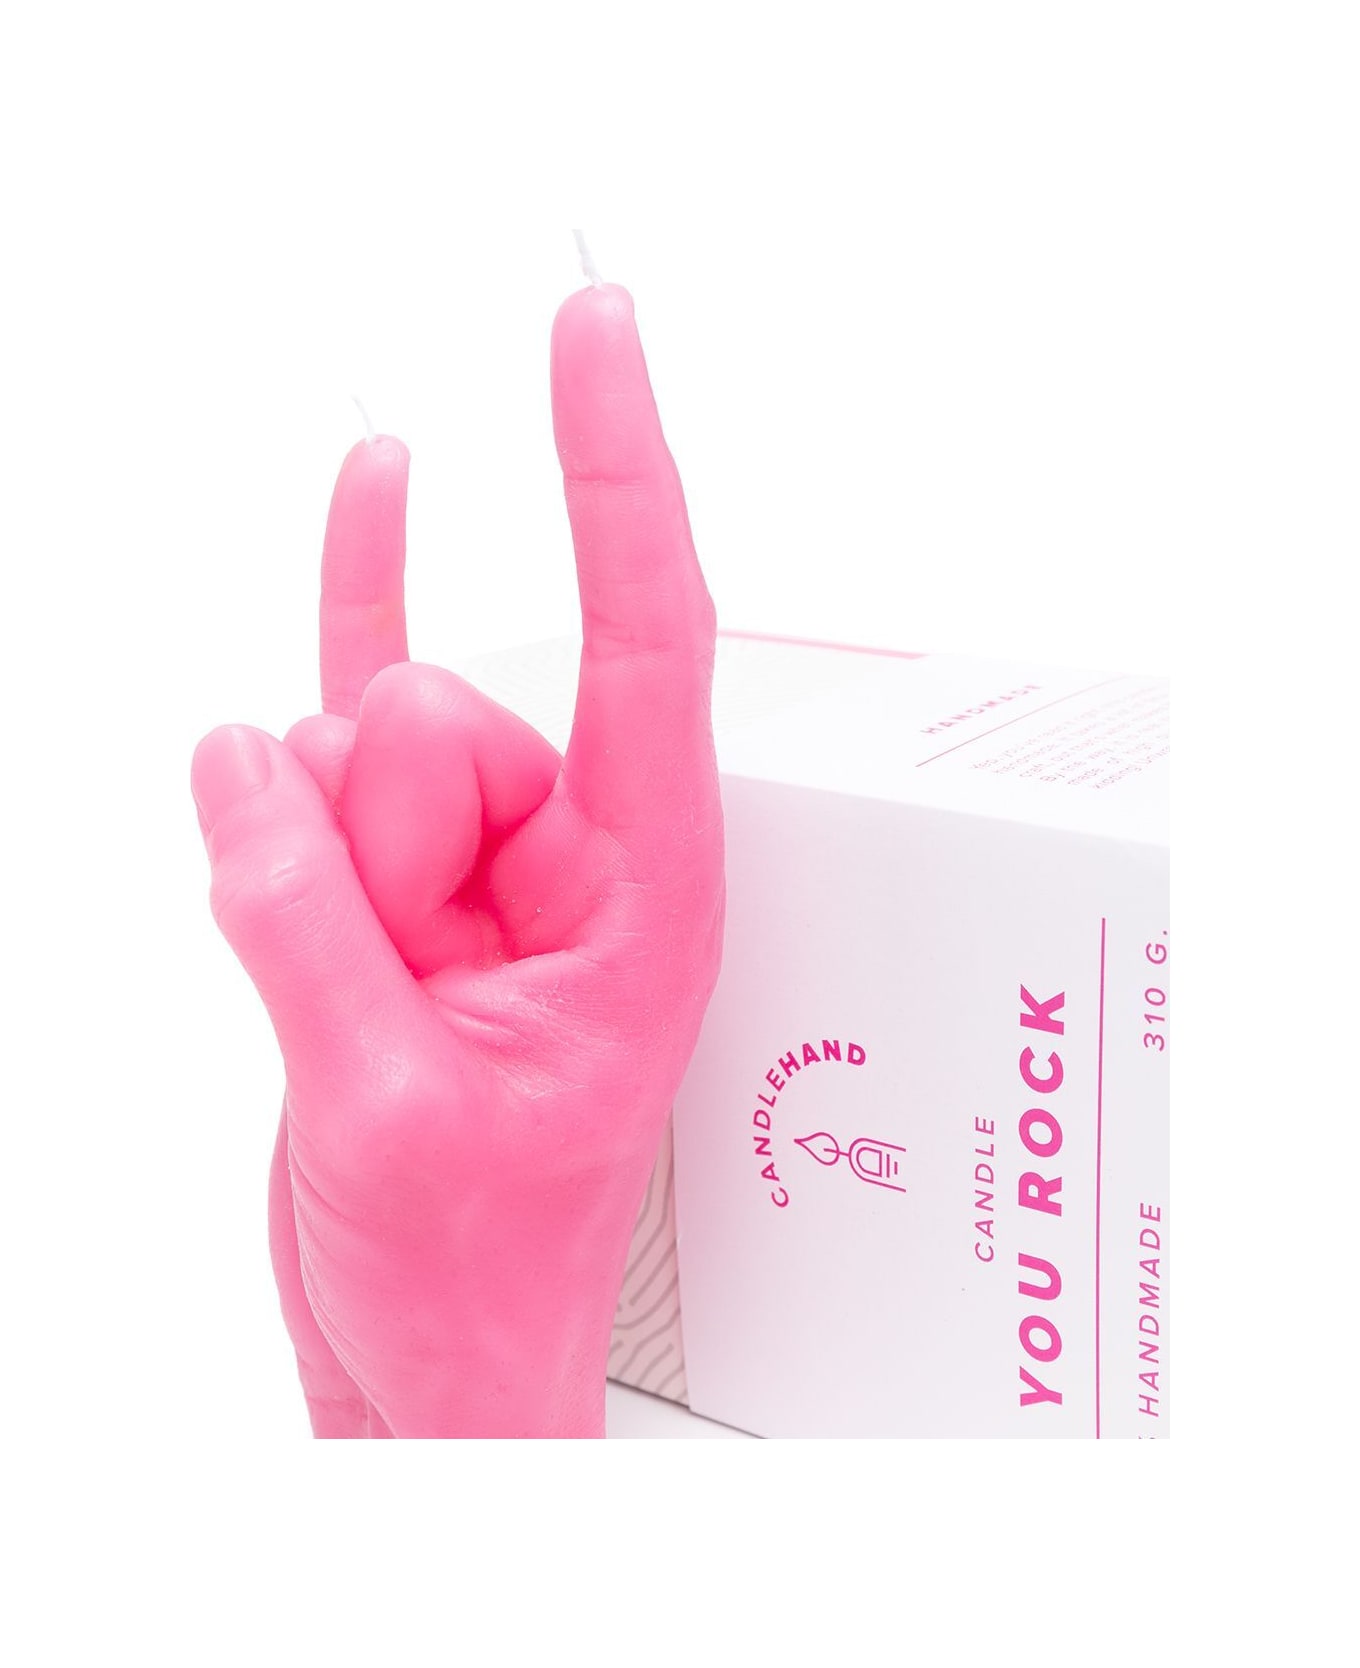 Candlehand You Rock Candle - Pink